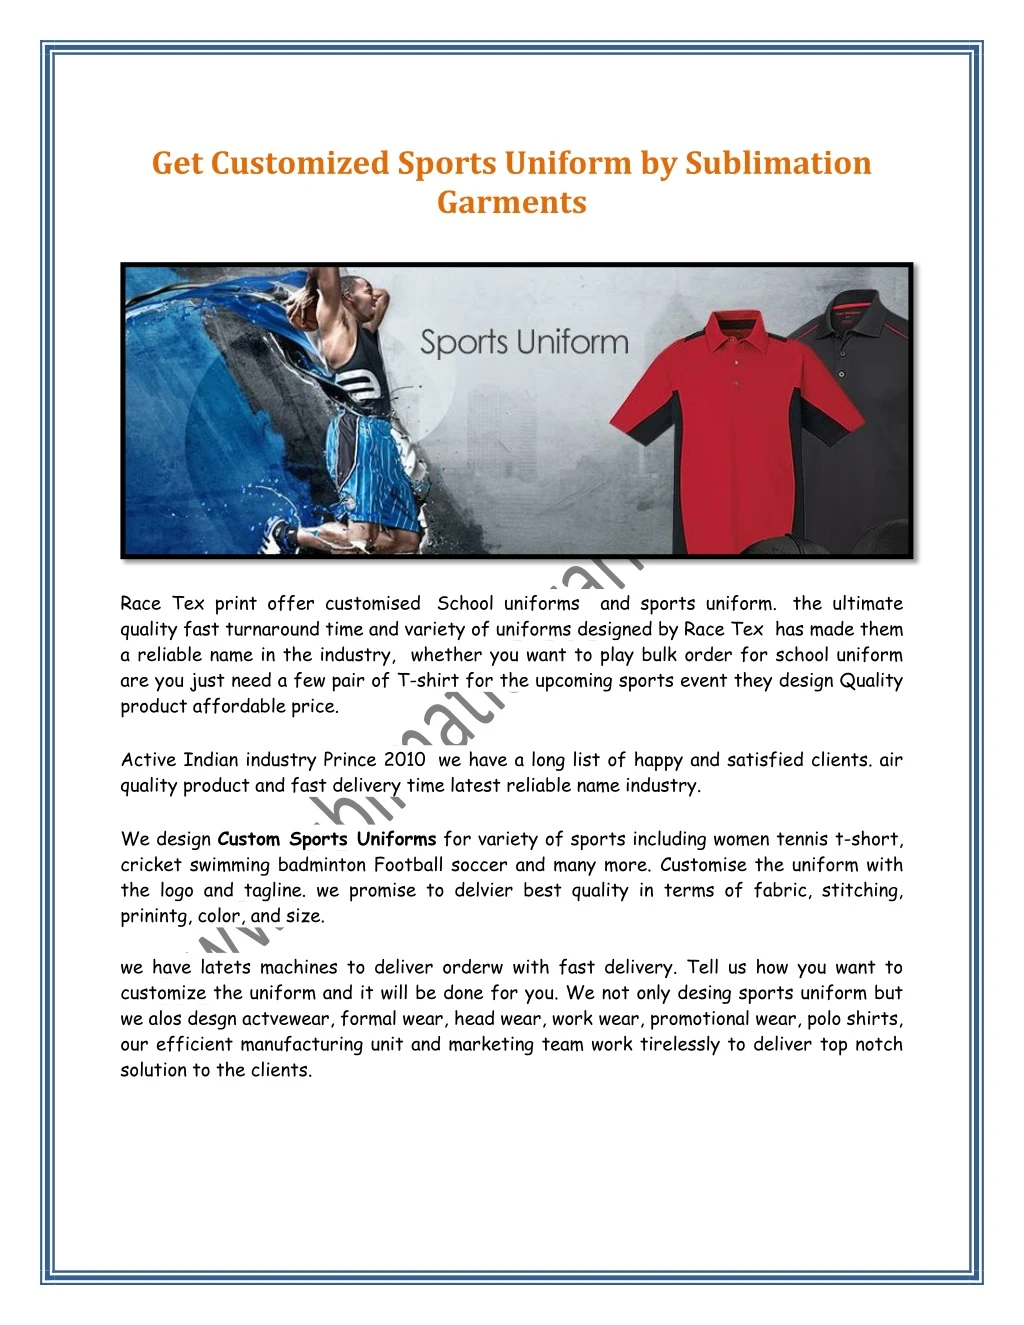 get customized sports uniform by sublimation